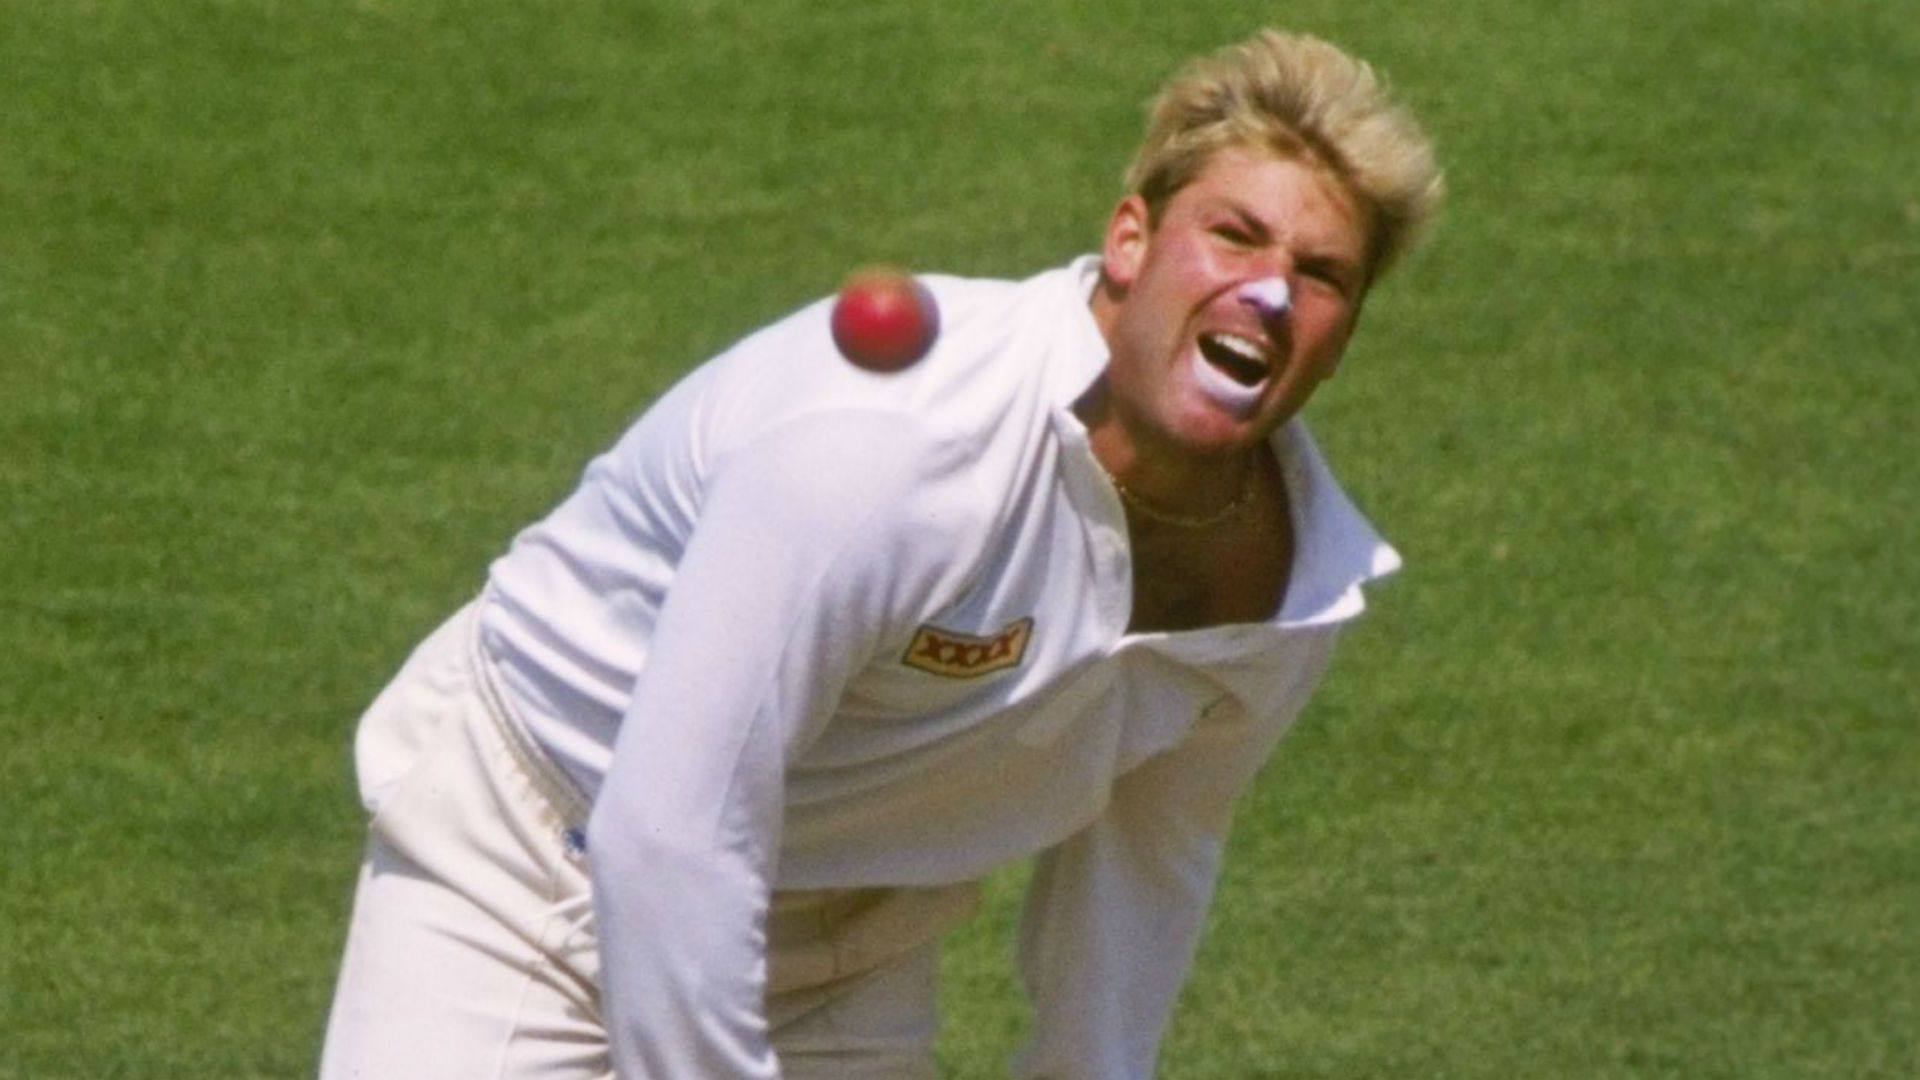 Shane Warne: How 'The Ball of the Century' sparked his Ashes dominance